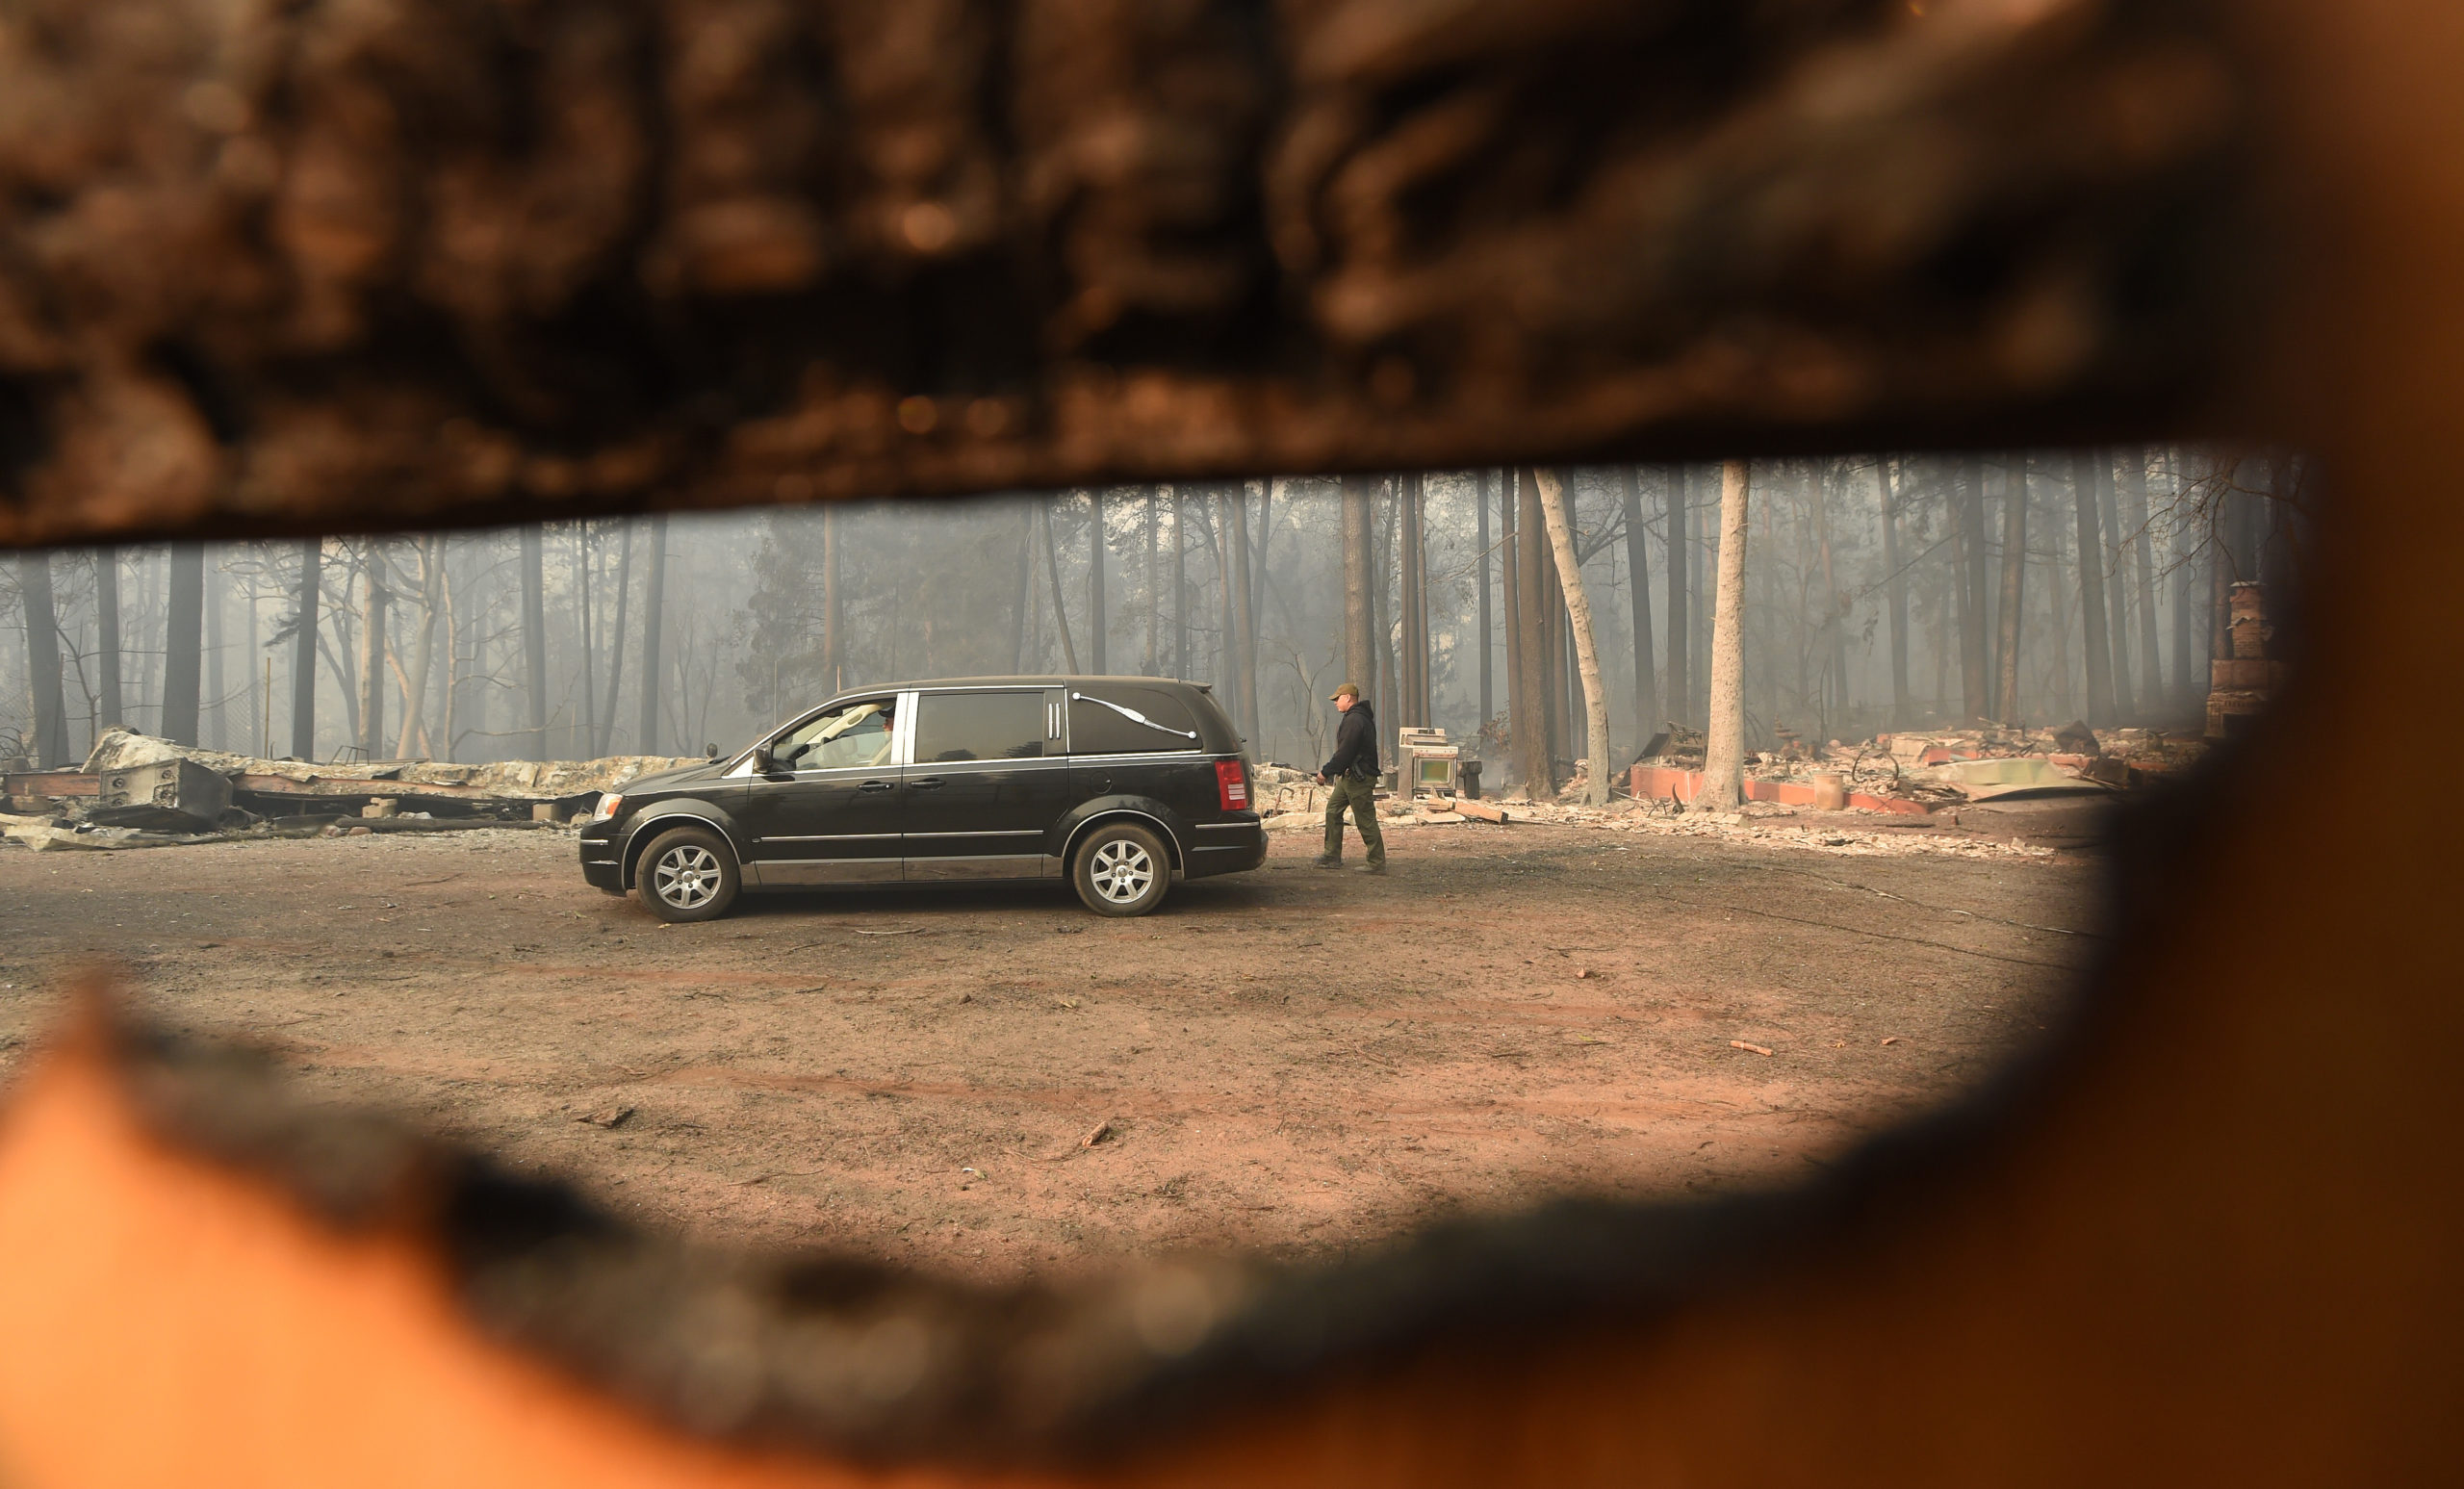 Yuba and Butte County Sheriff officers search for bodies at a burned residence in Paradise, California, on Nov. 10, 2018 in the wake of the Camp Fire. (Photo: Josh Edelson/AFP, Getty Images)